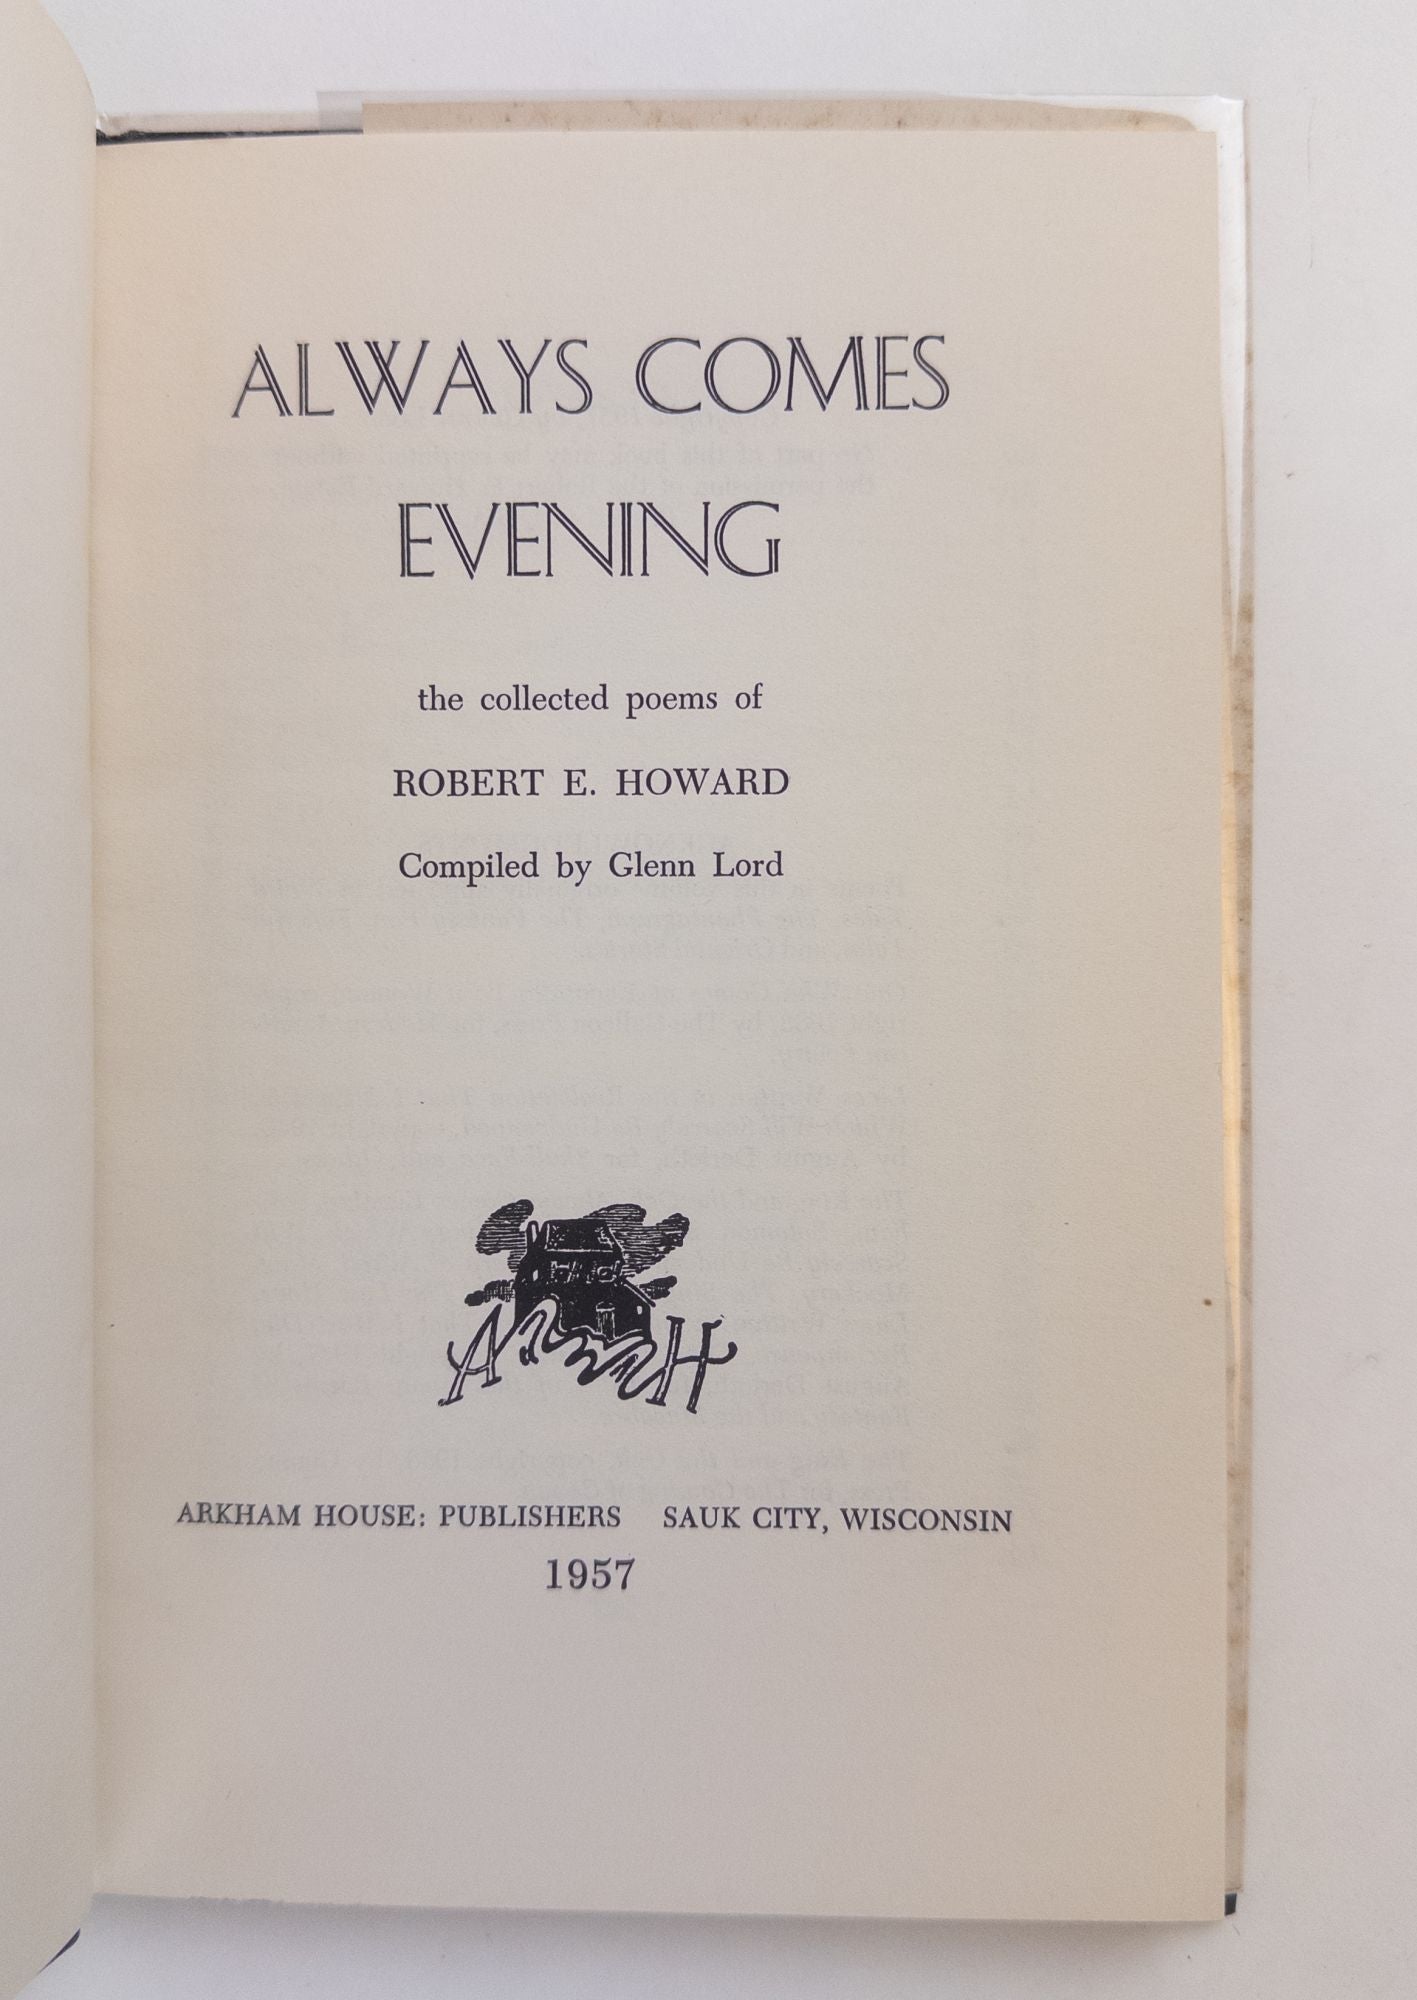 Product Image for ALWAYS COMES EVENING [Inscribed]